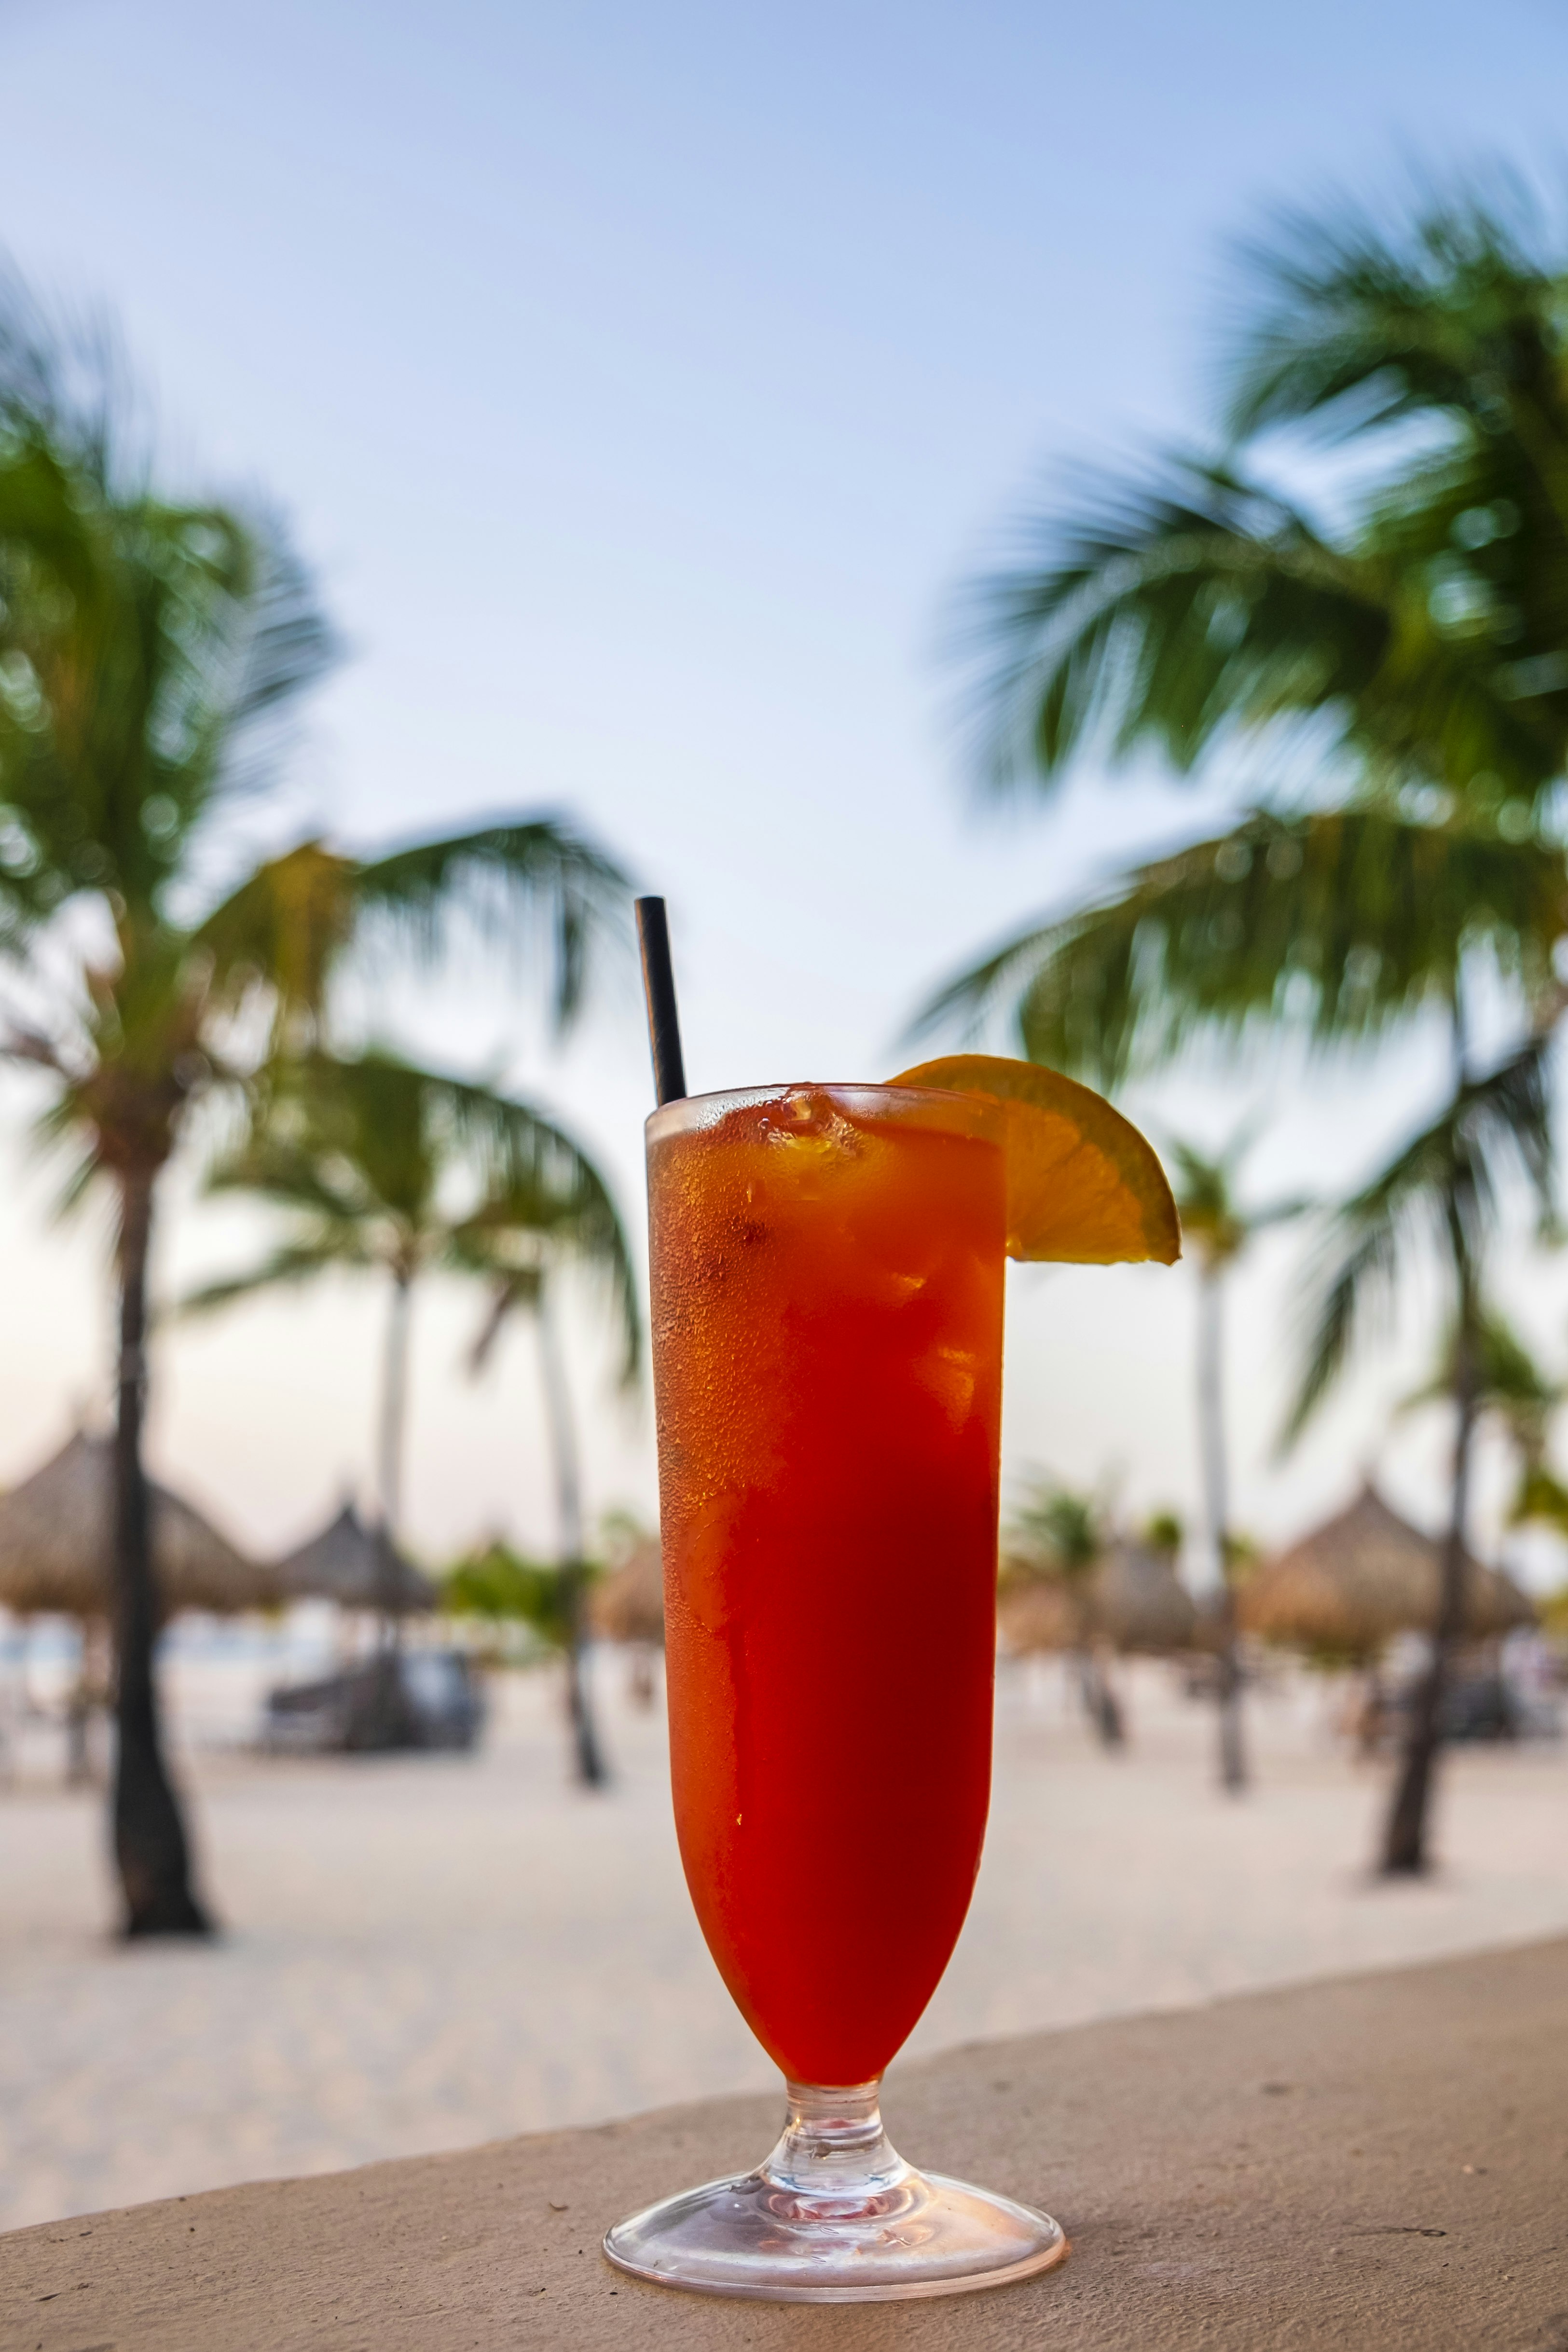 A tall glass of an Aruba Ariba on ice, garnished with a lime wedge and a black straw rests on a cement ledge. In the background is sand, small huts and palm trees.